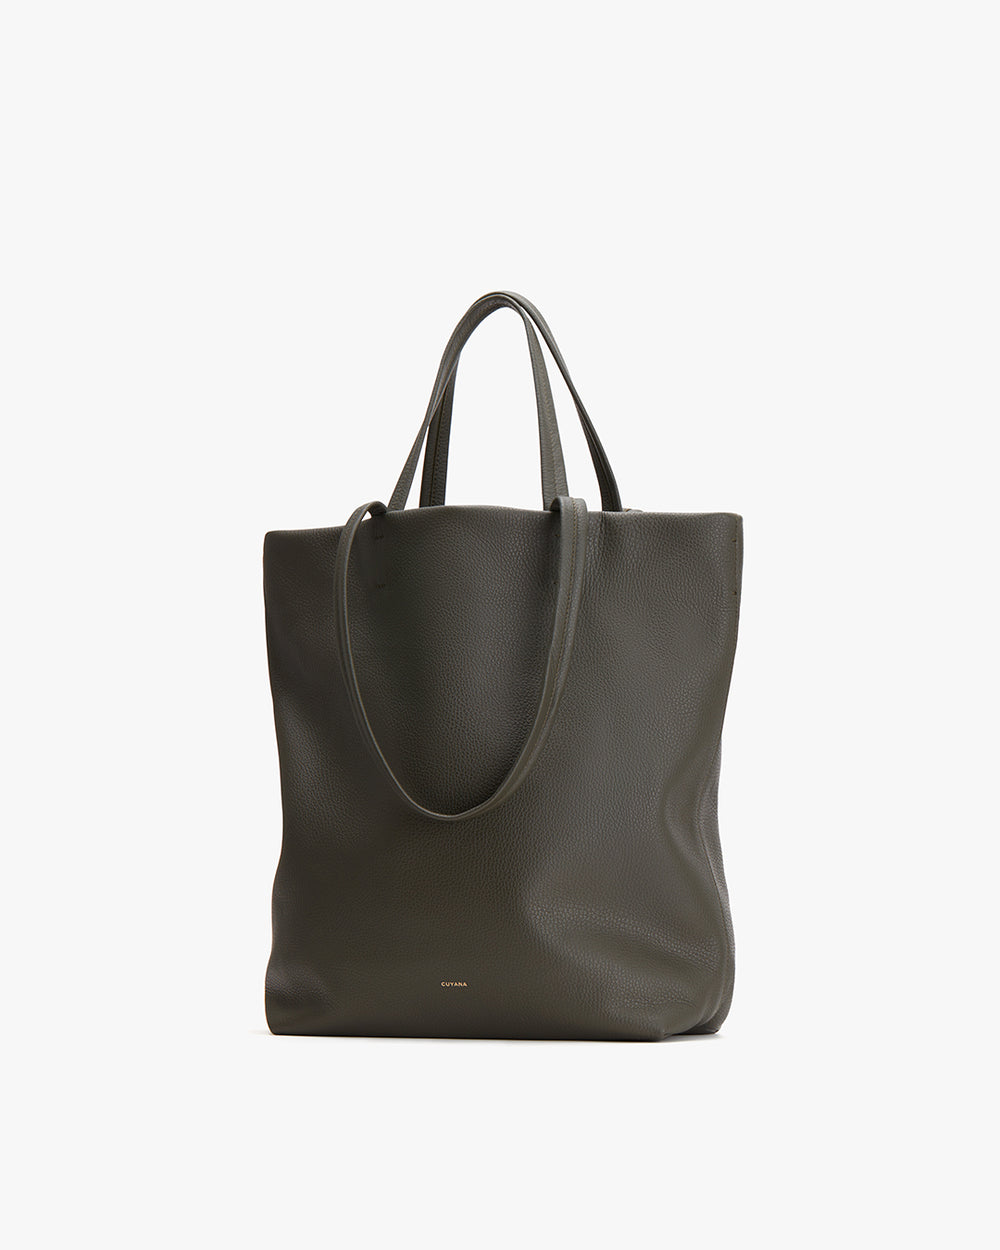 Tote bag with two handles standing upright.